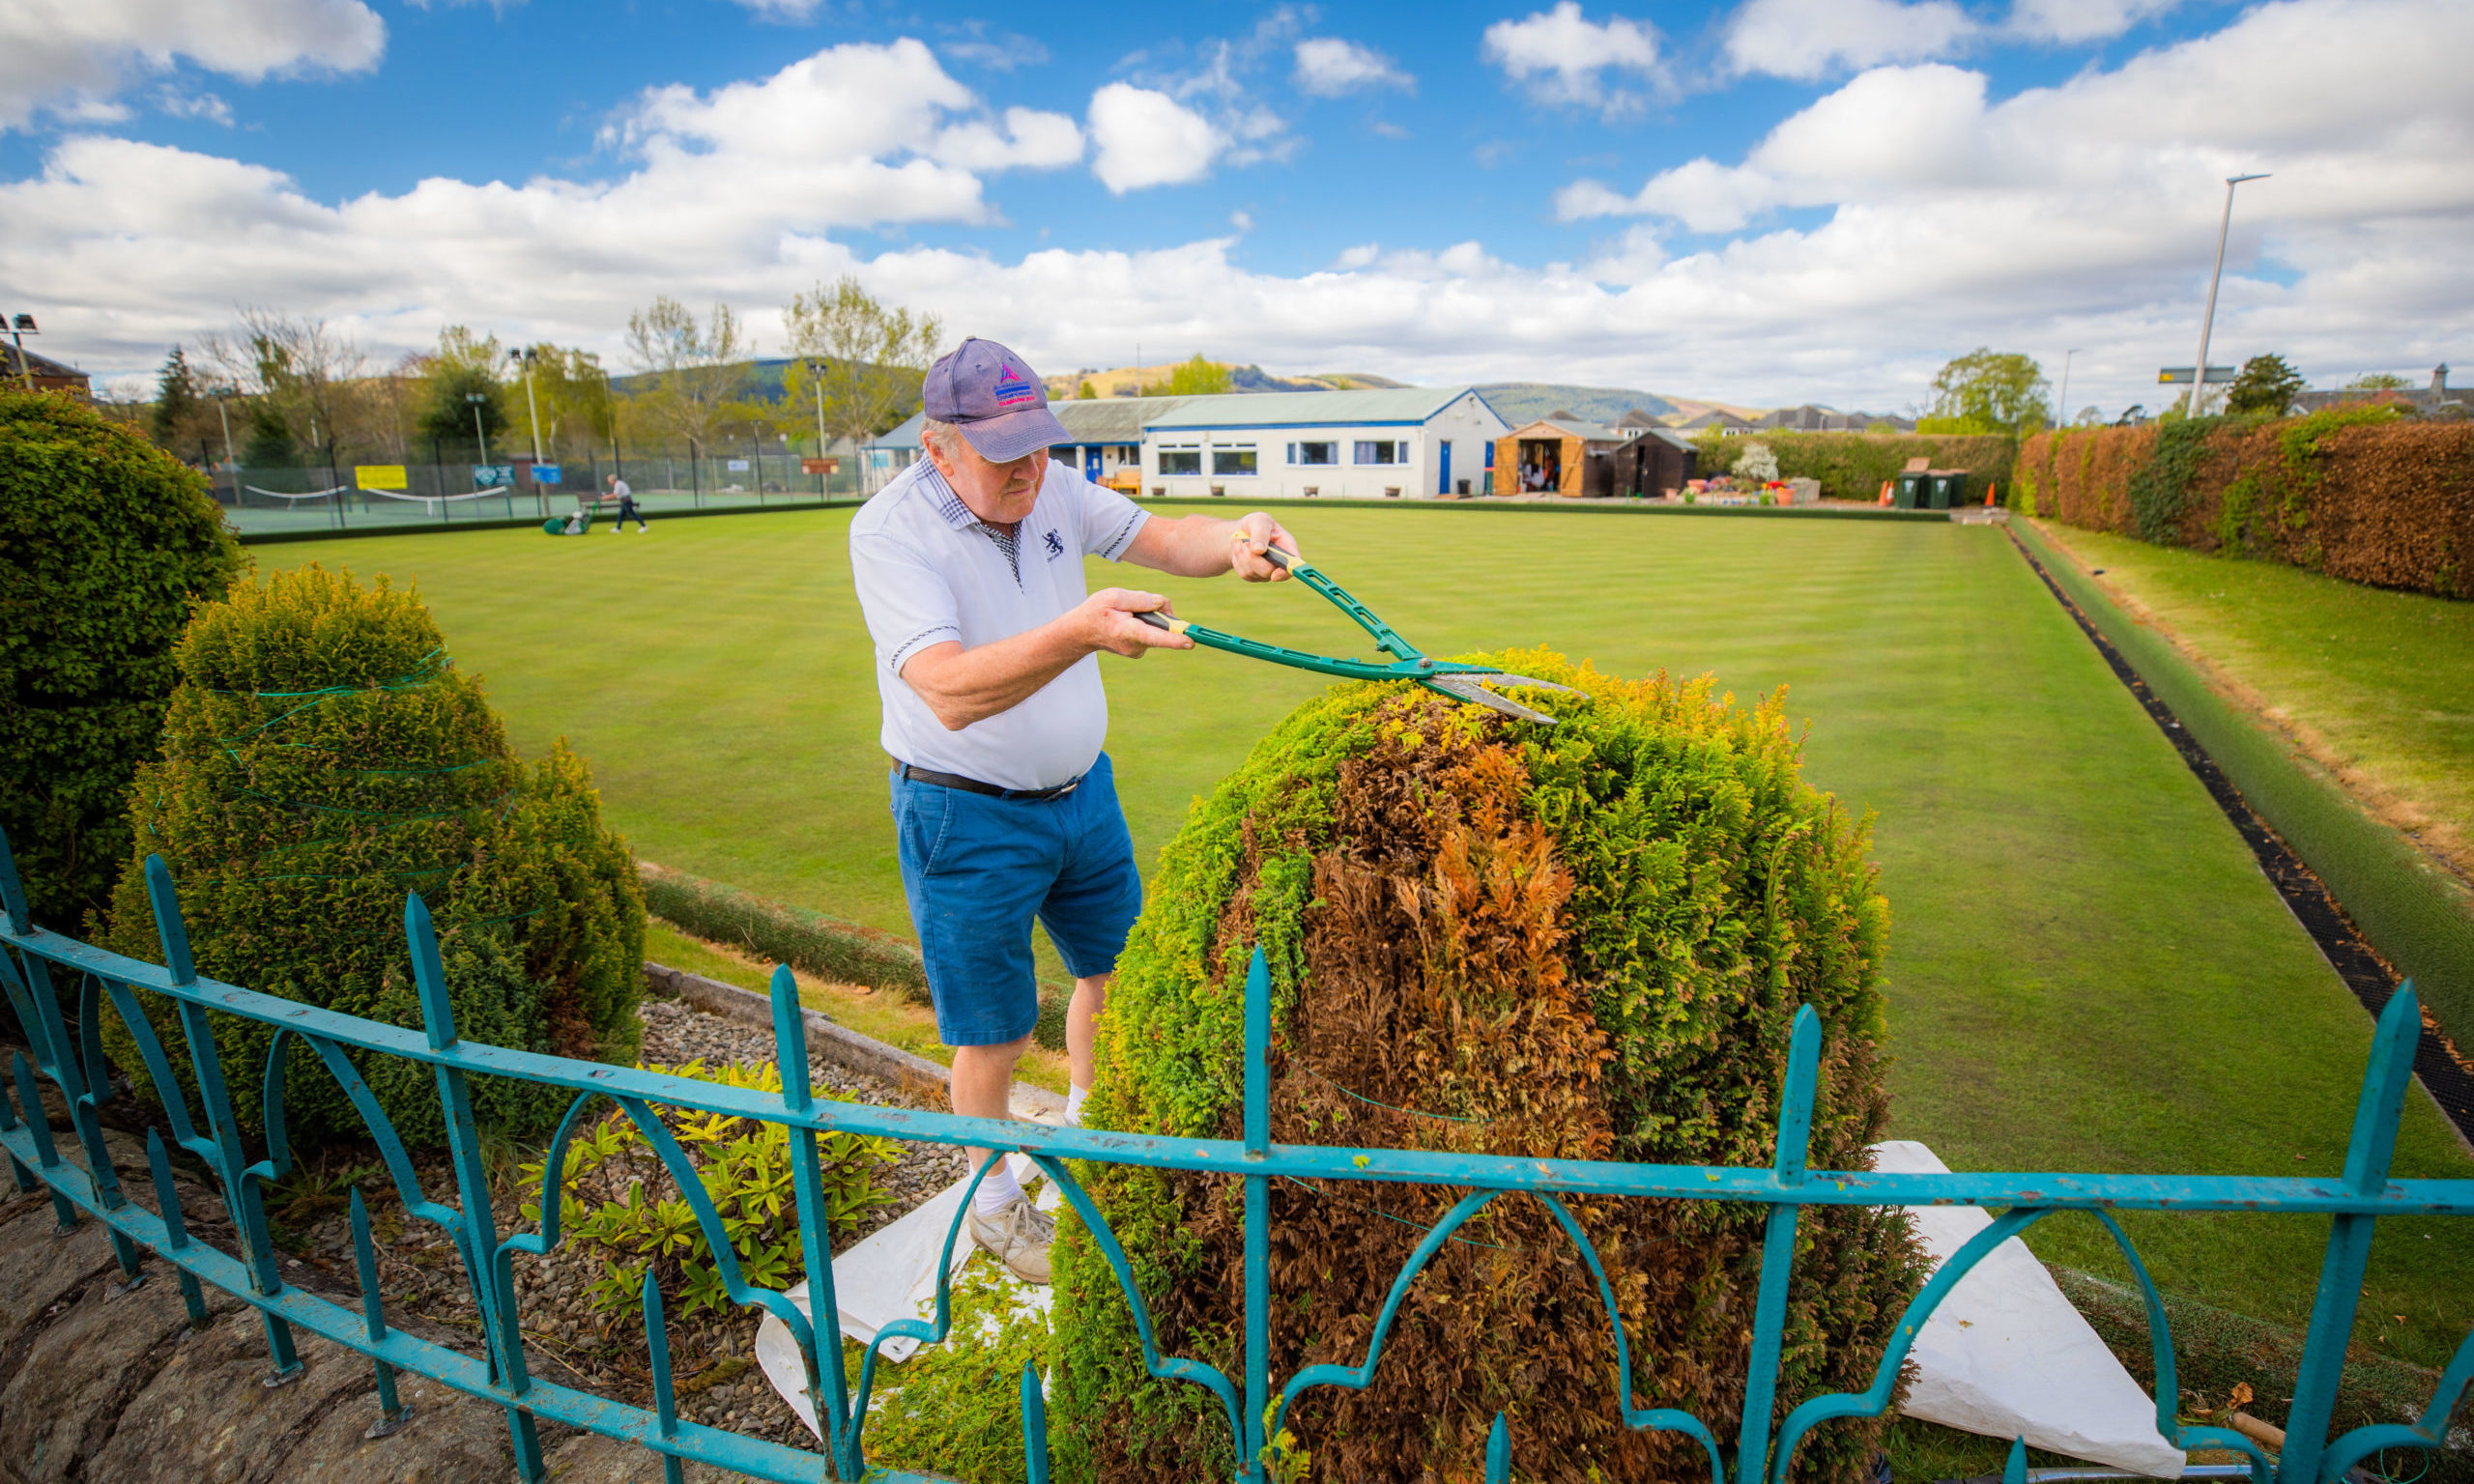 Members of the Bowling Club volunteering to maintain the grounds during lockdown.